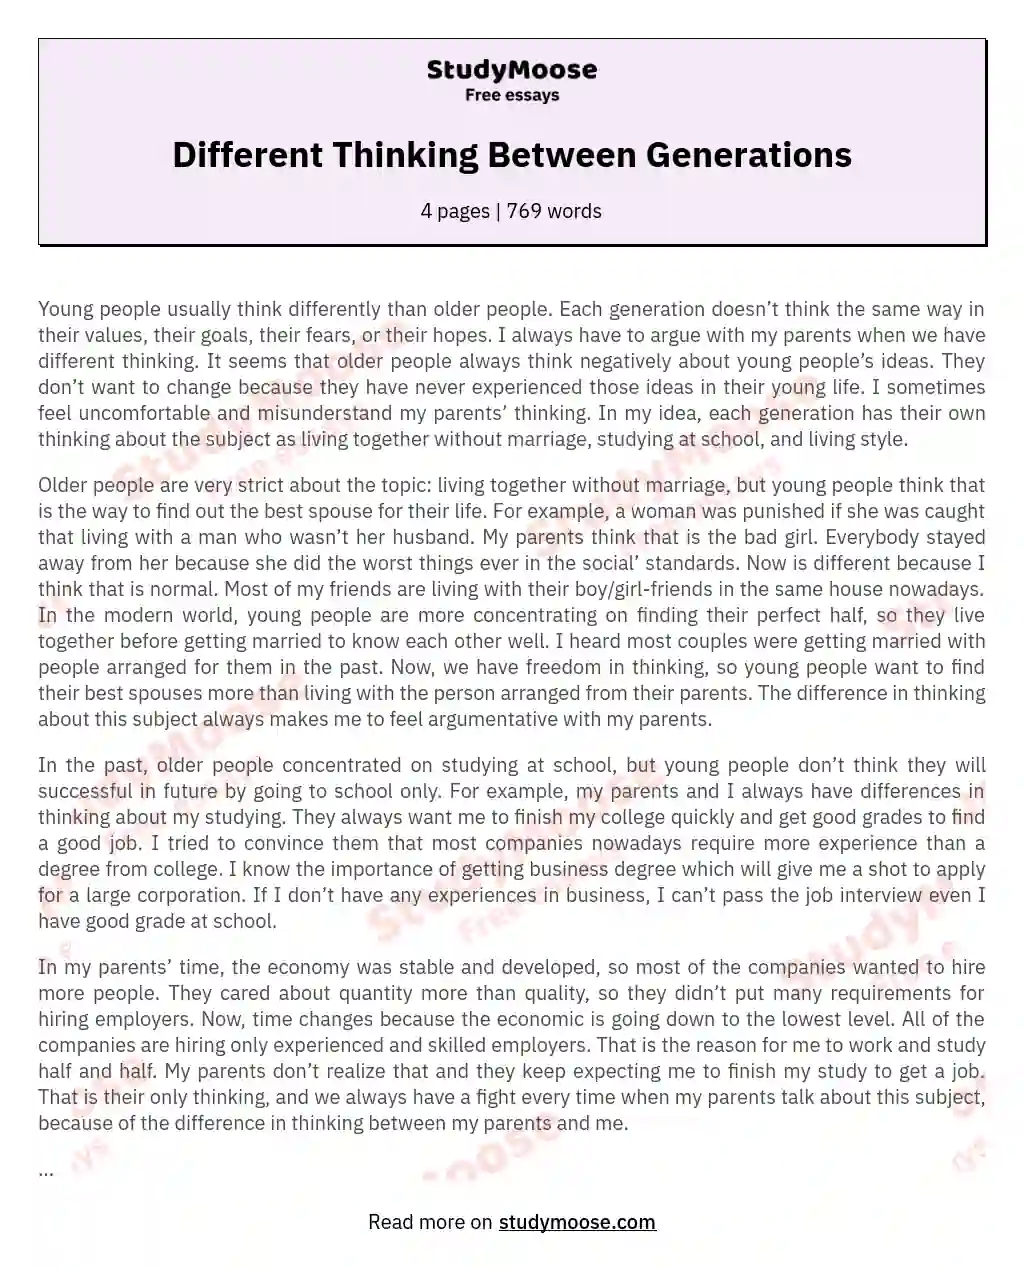 Different Thinking Between Generations